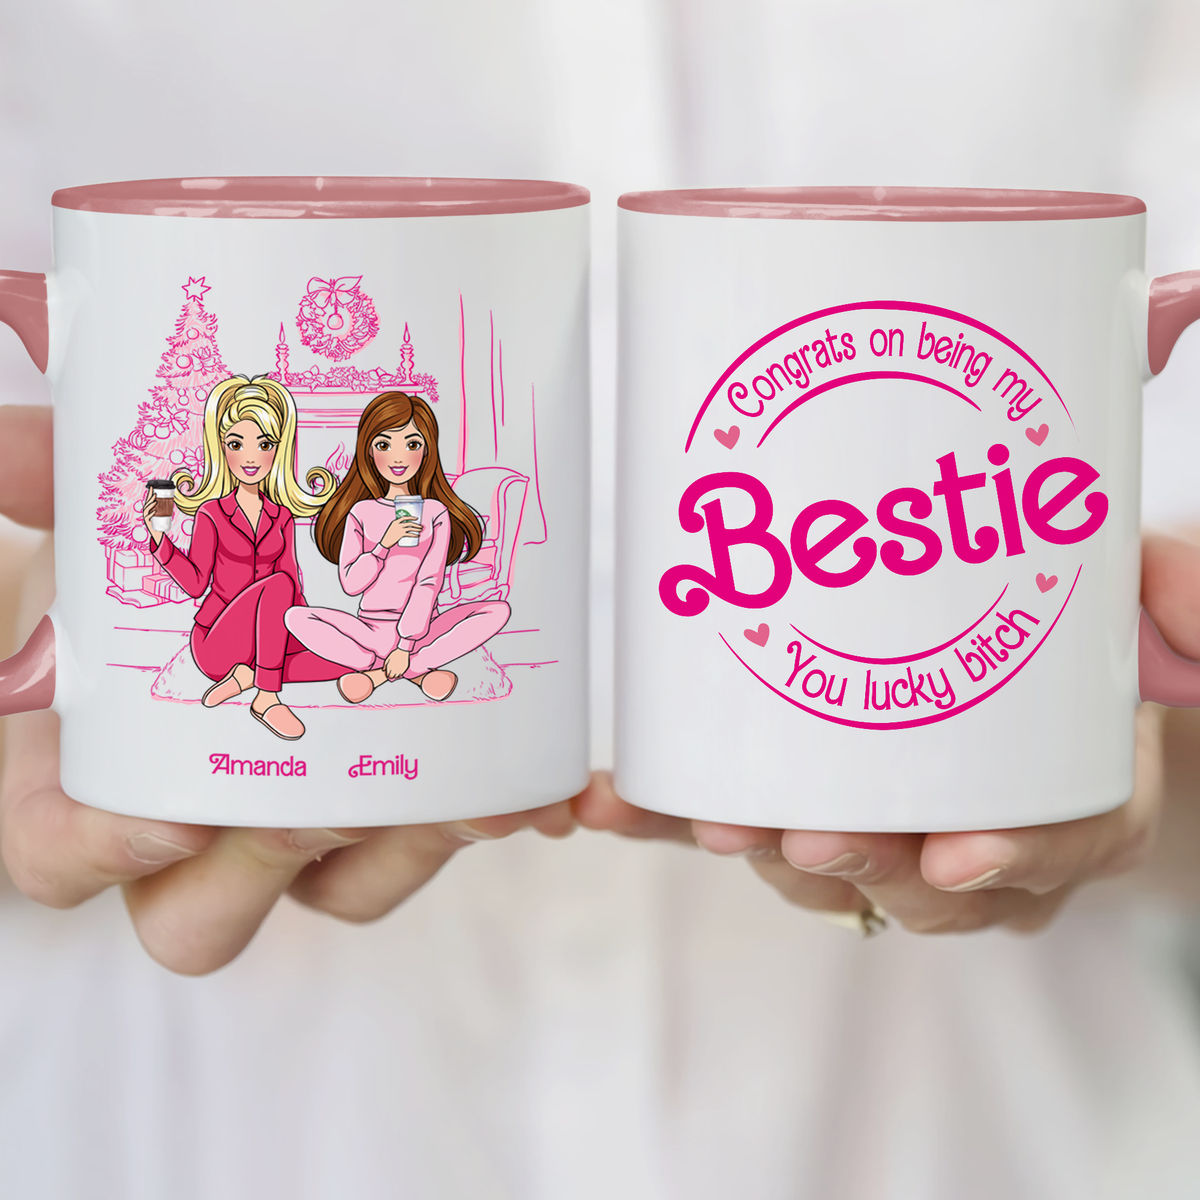 Personalized Mug - The Best Mug Ever - Pink Dolls - In Our Bestie Era - Novelty Gifts For Her (N3)_7